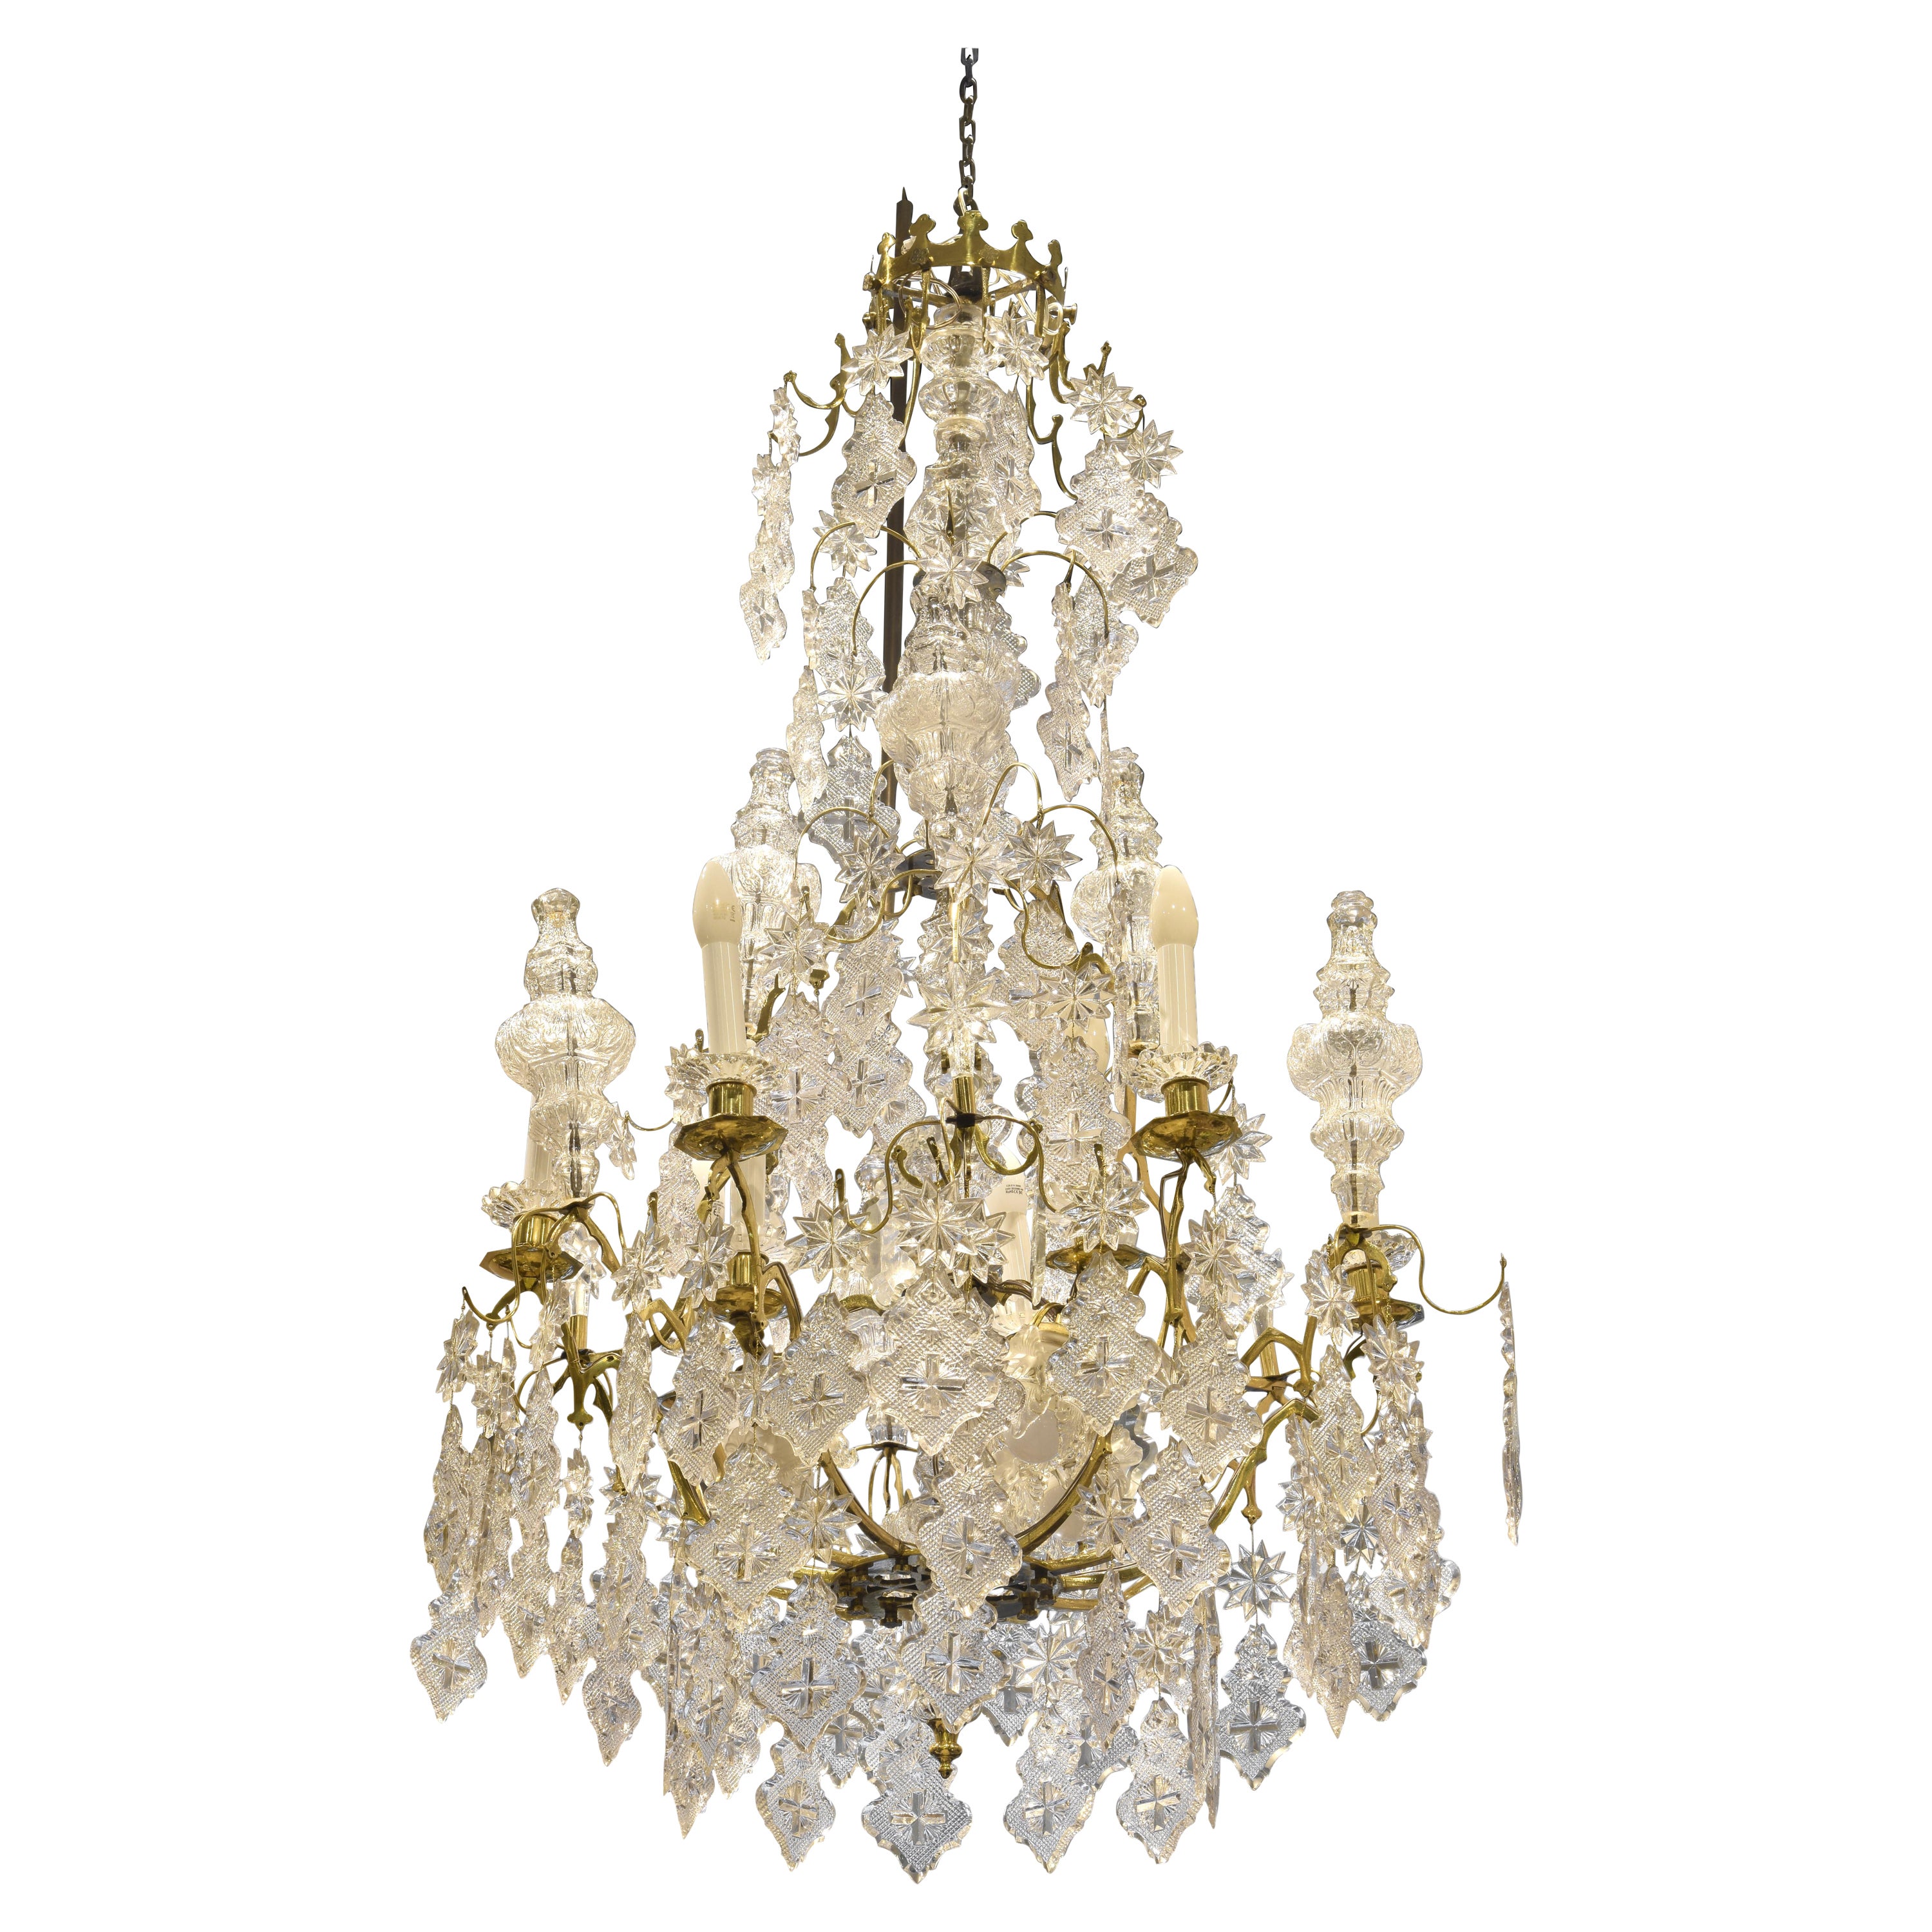 Louis XV Style Chandelier 12 Lights, Glass, Bronze, Baccarat, France, 19th C